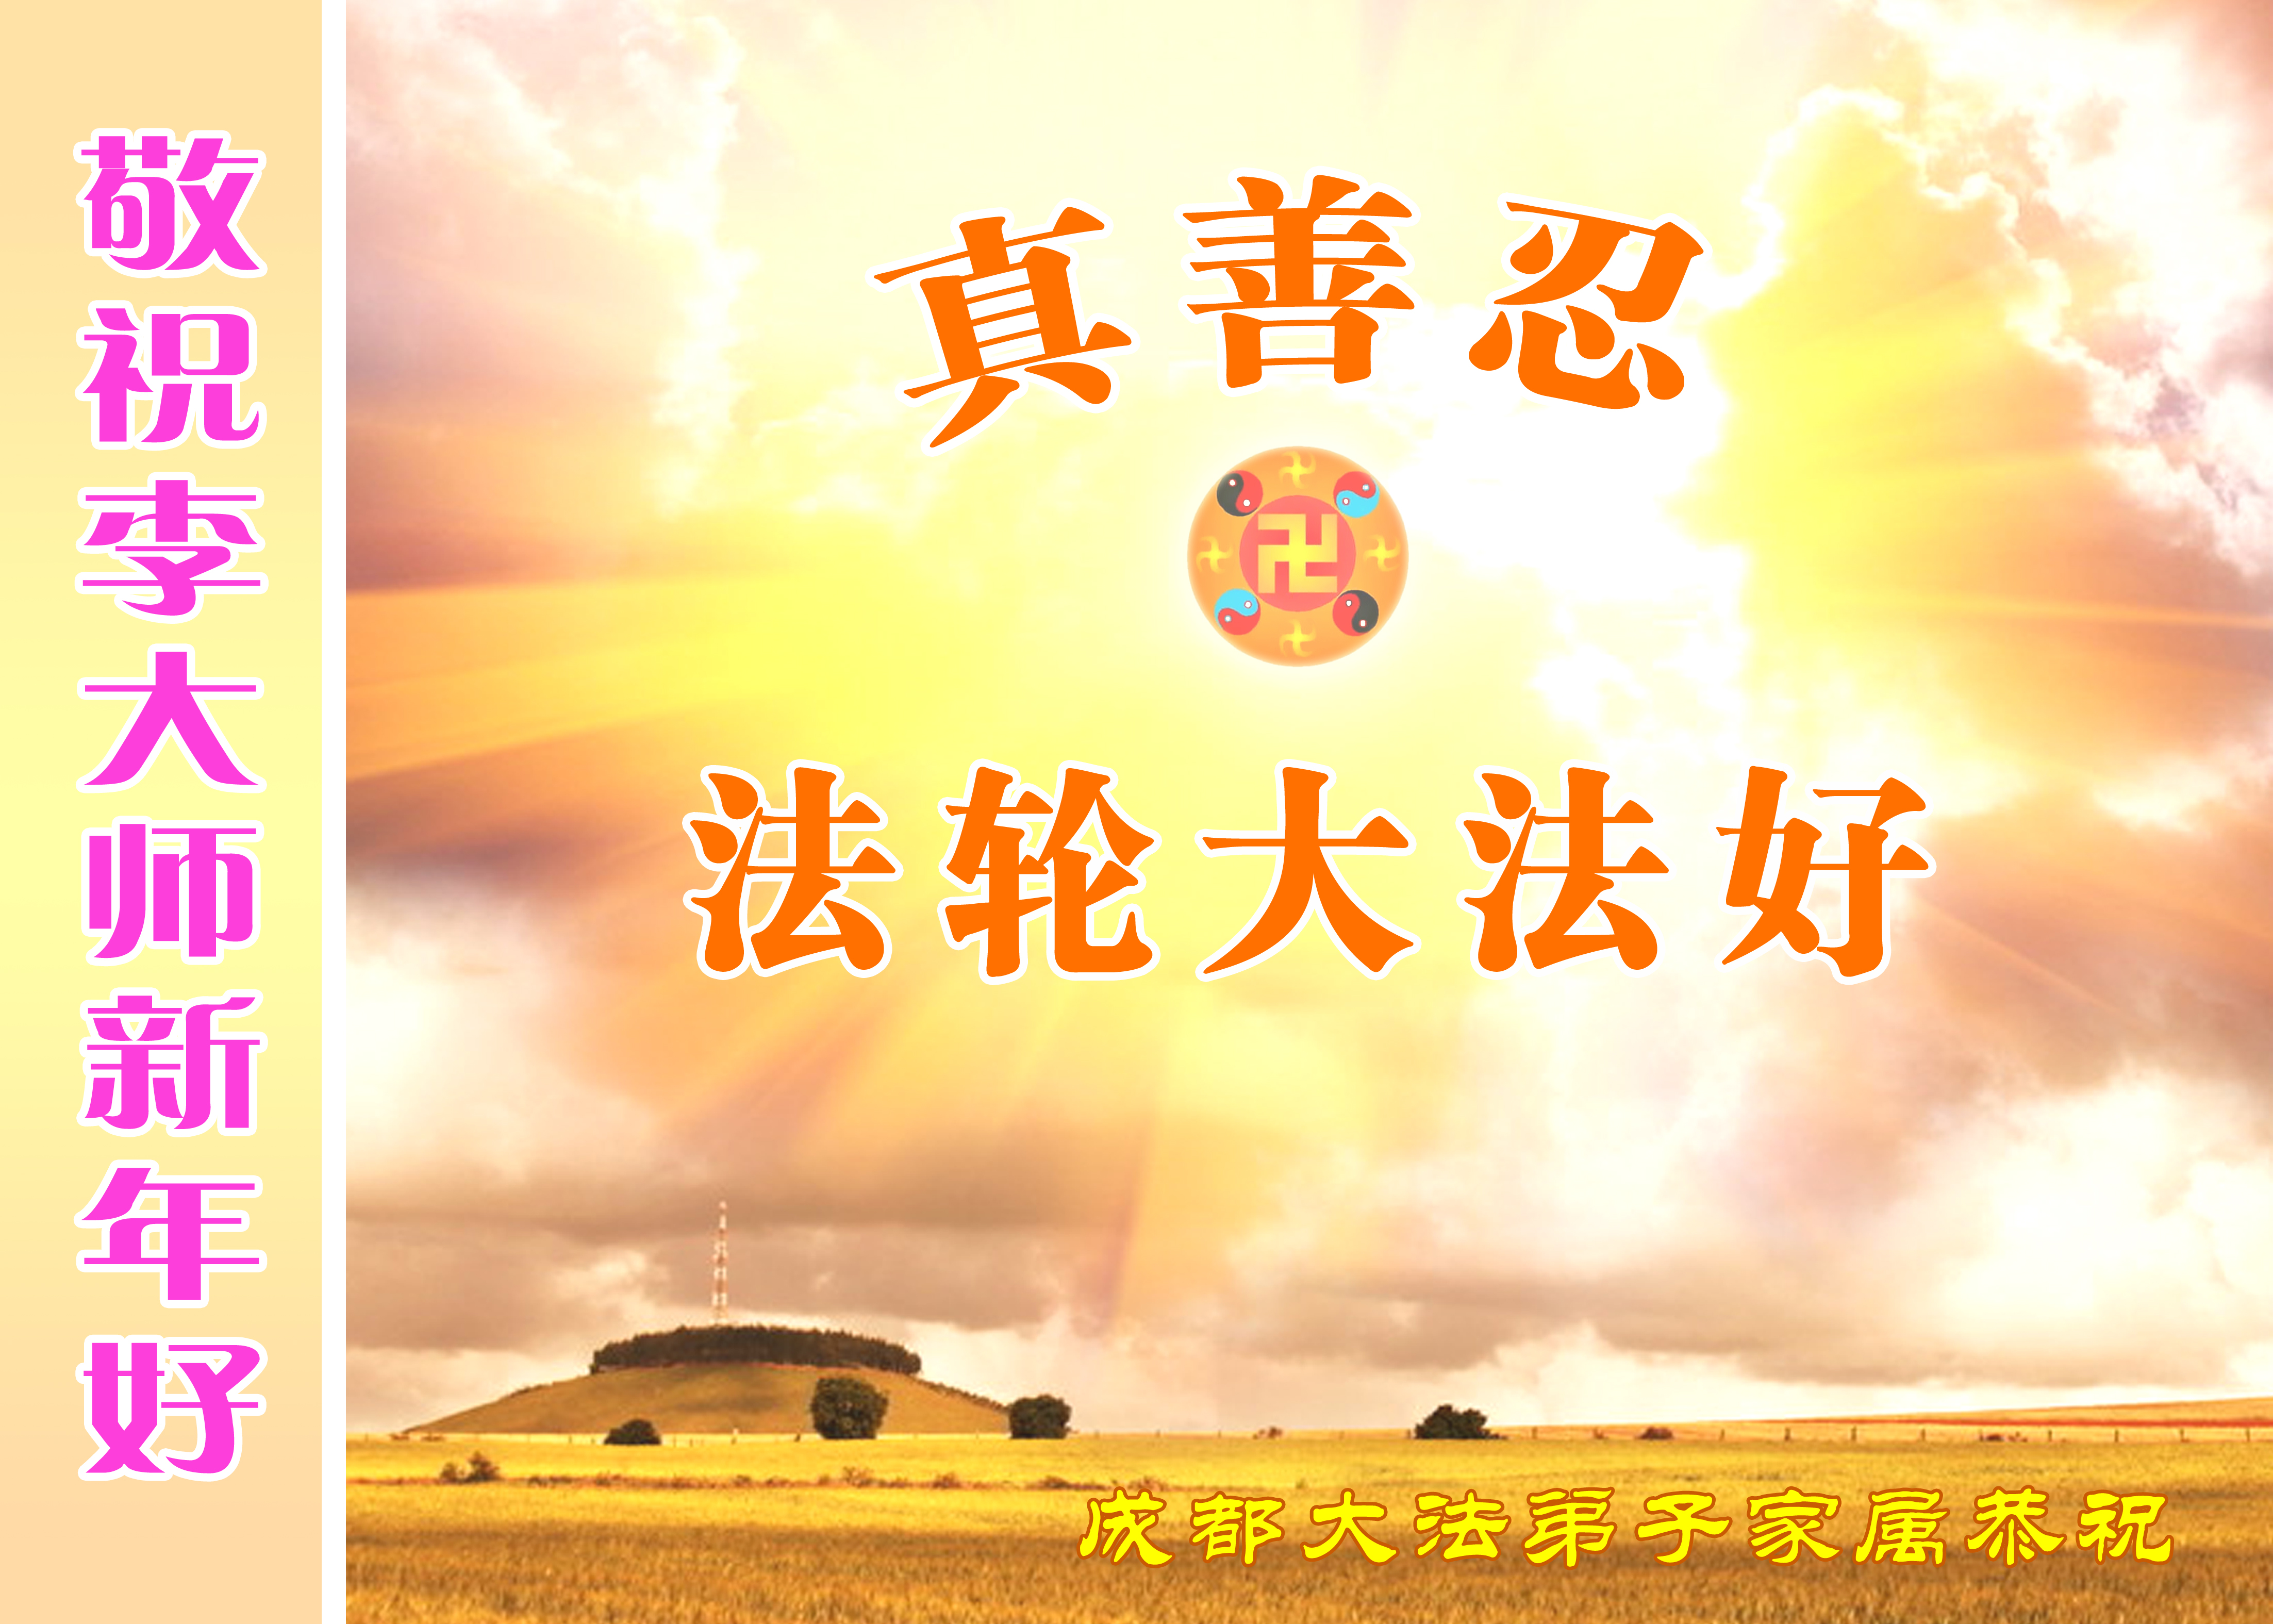 Image for article Chinese New Year Greetings Honor the Founder of Falun Gong, Master Li Hongzhi